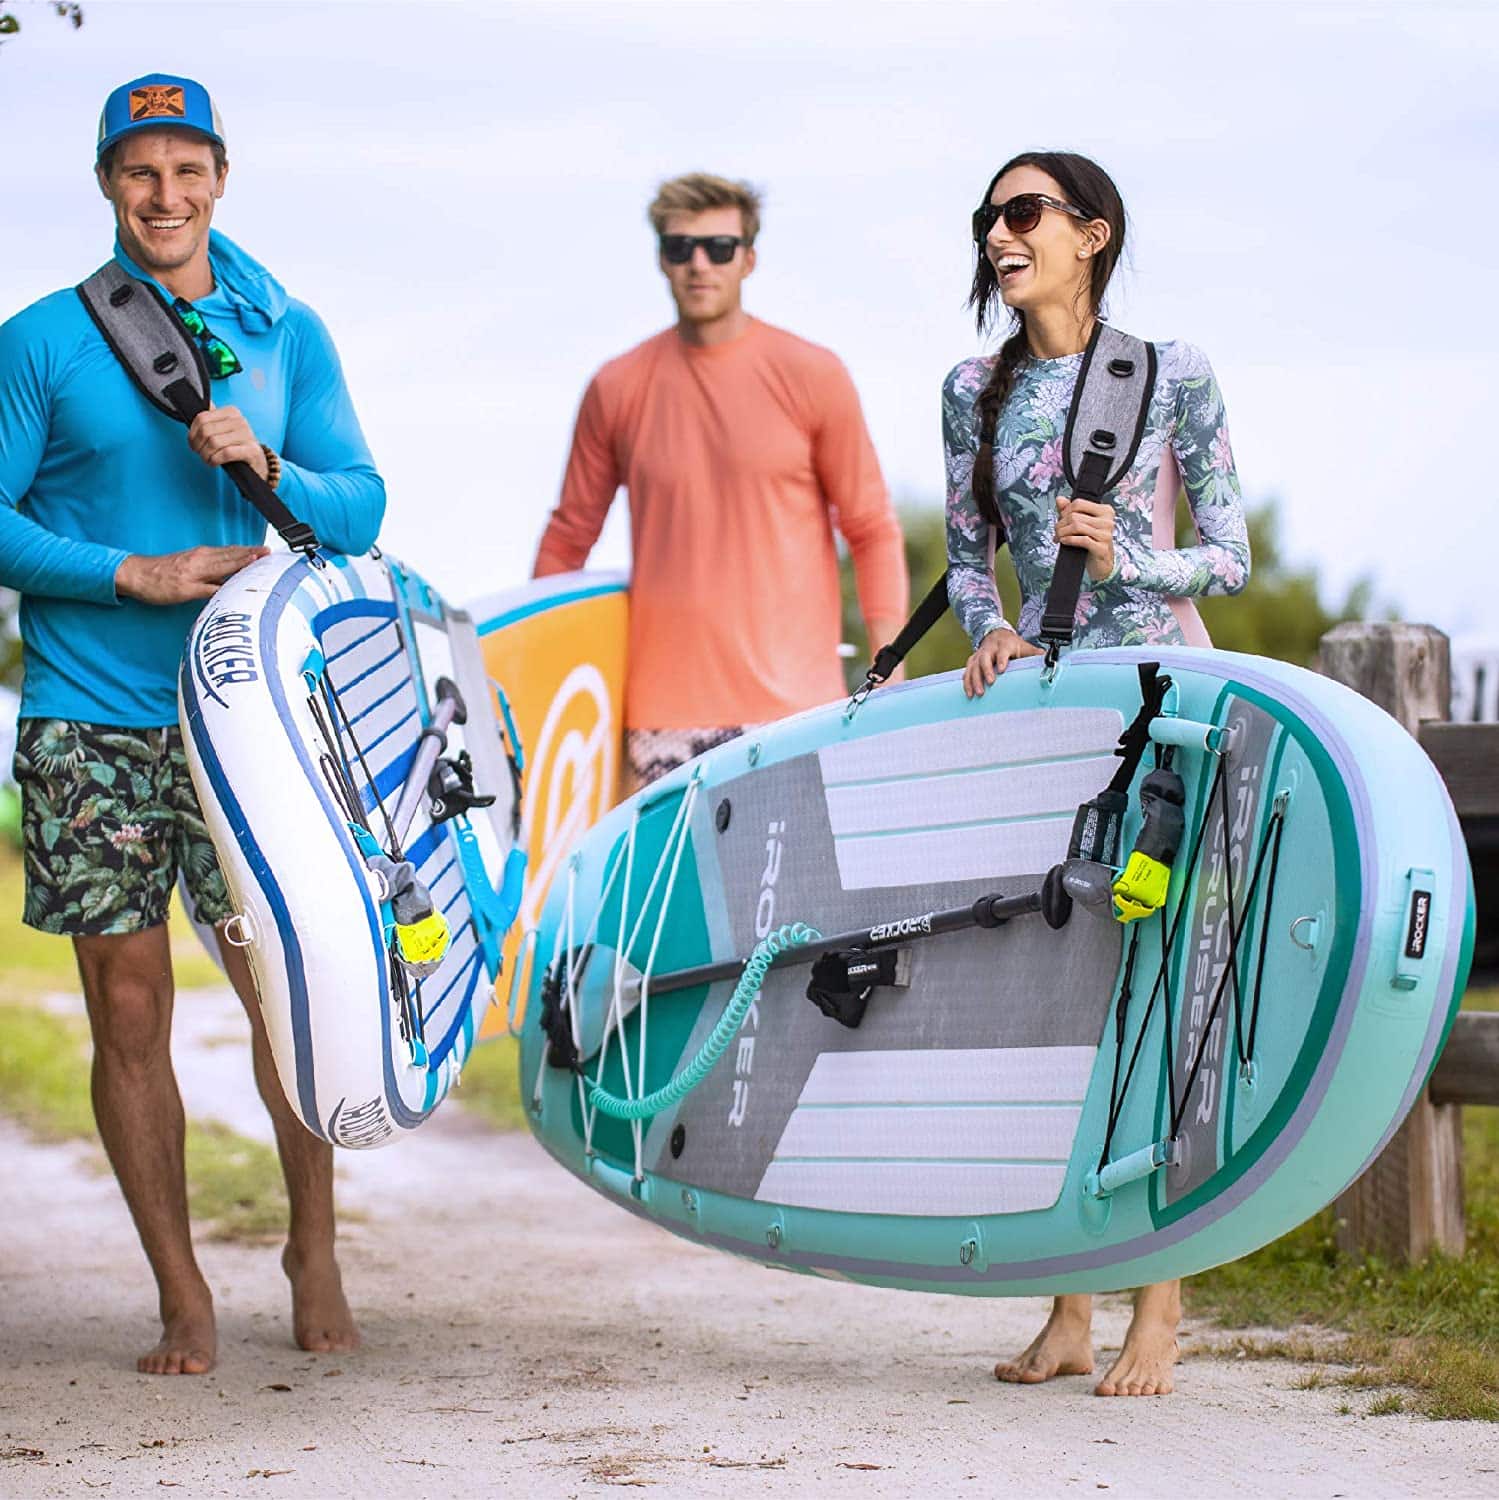 iRocker Cruiser Inflatable Paddle Board Review